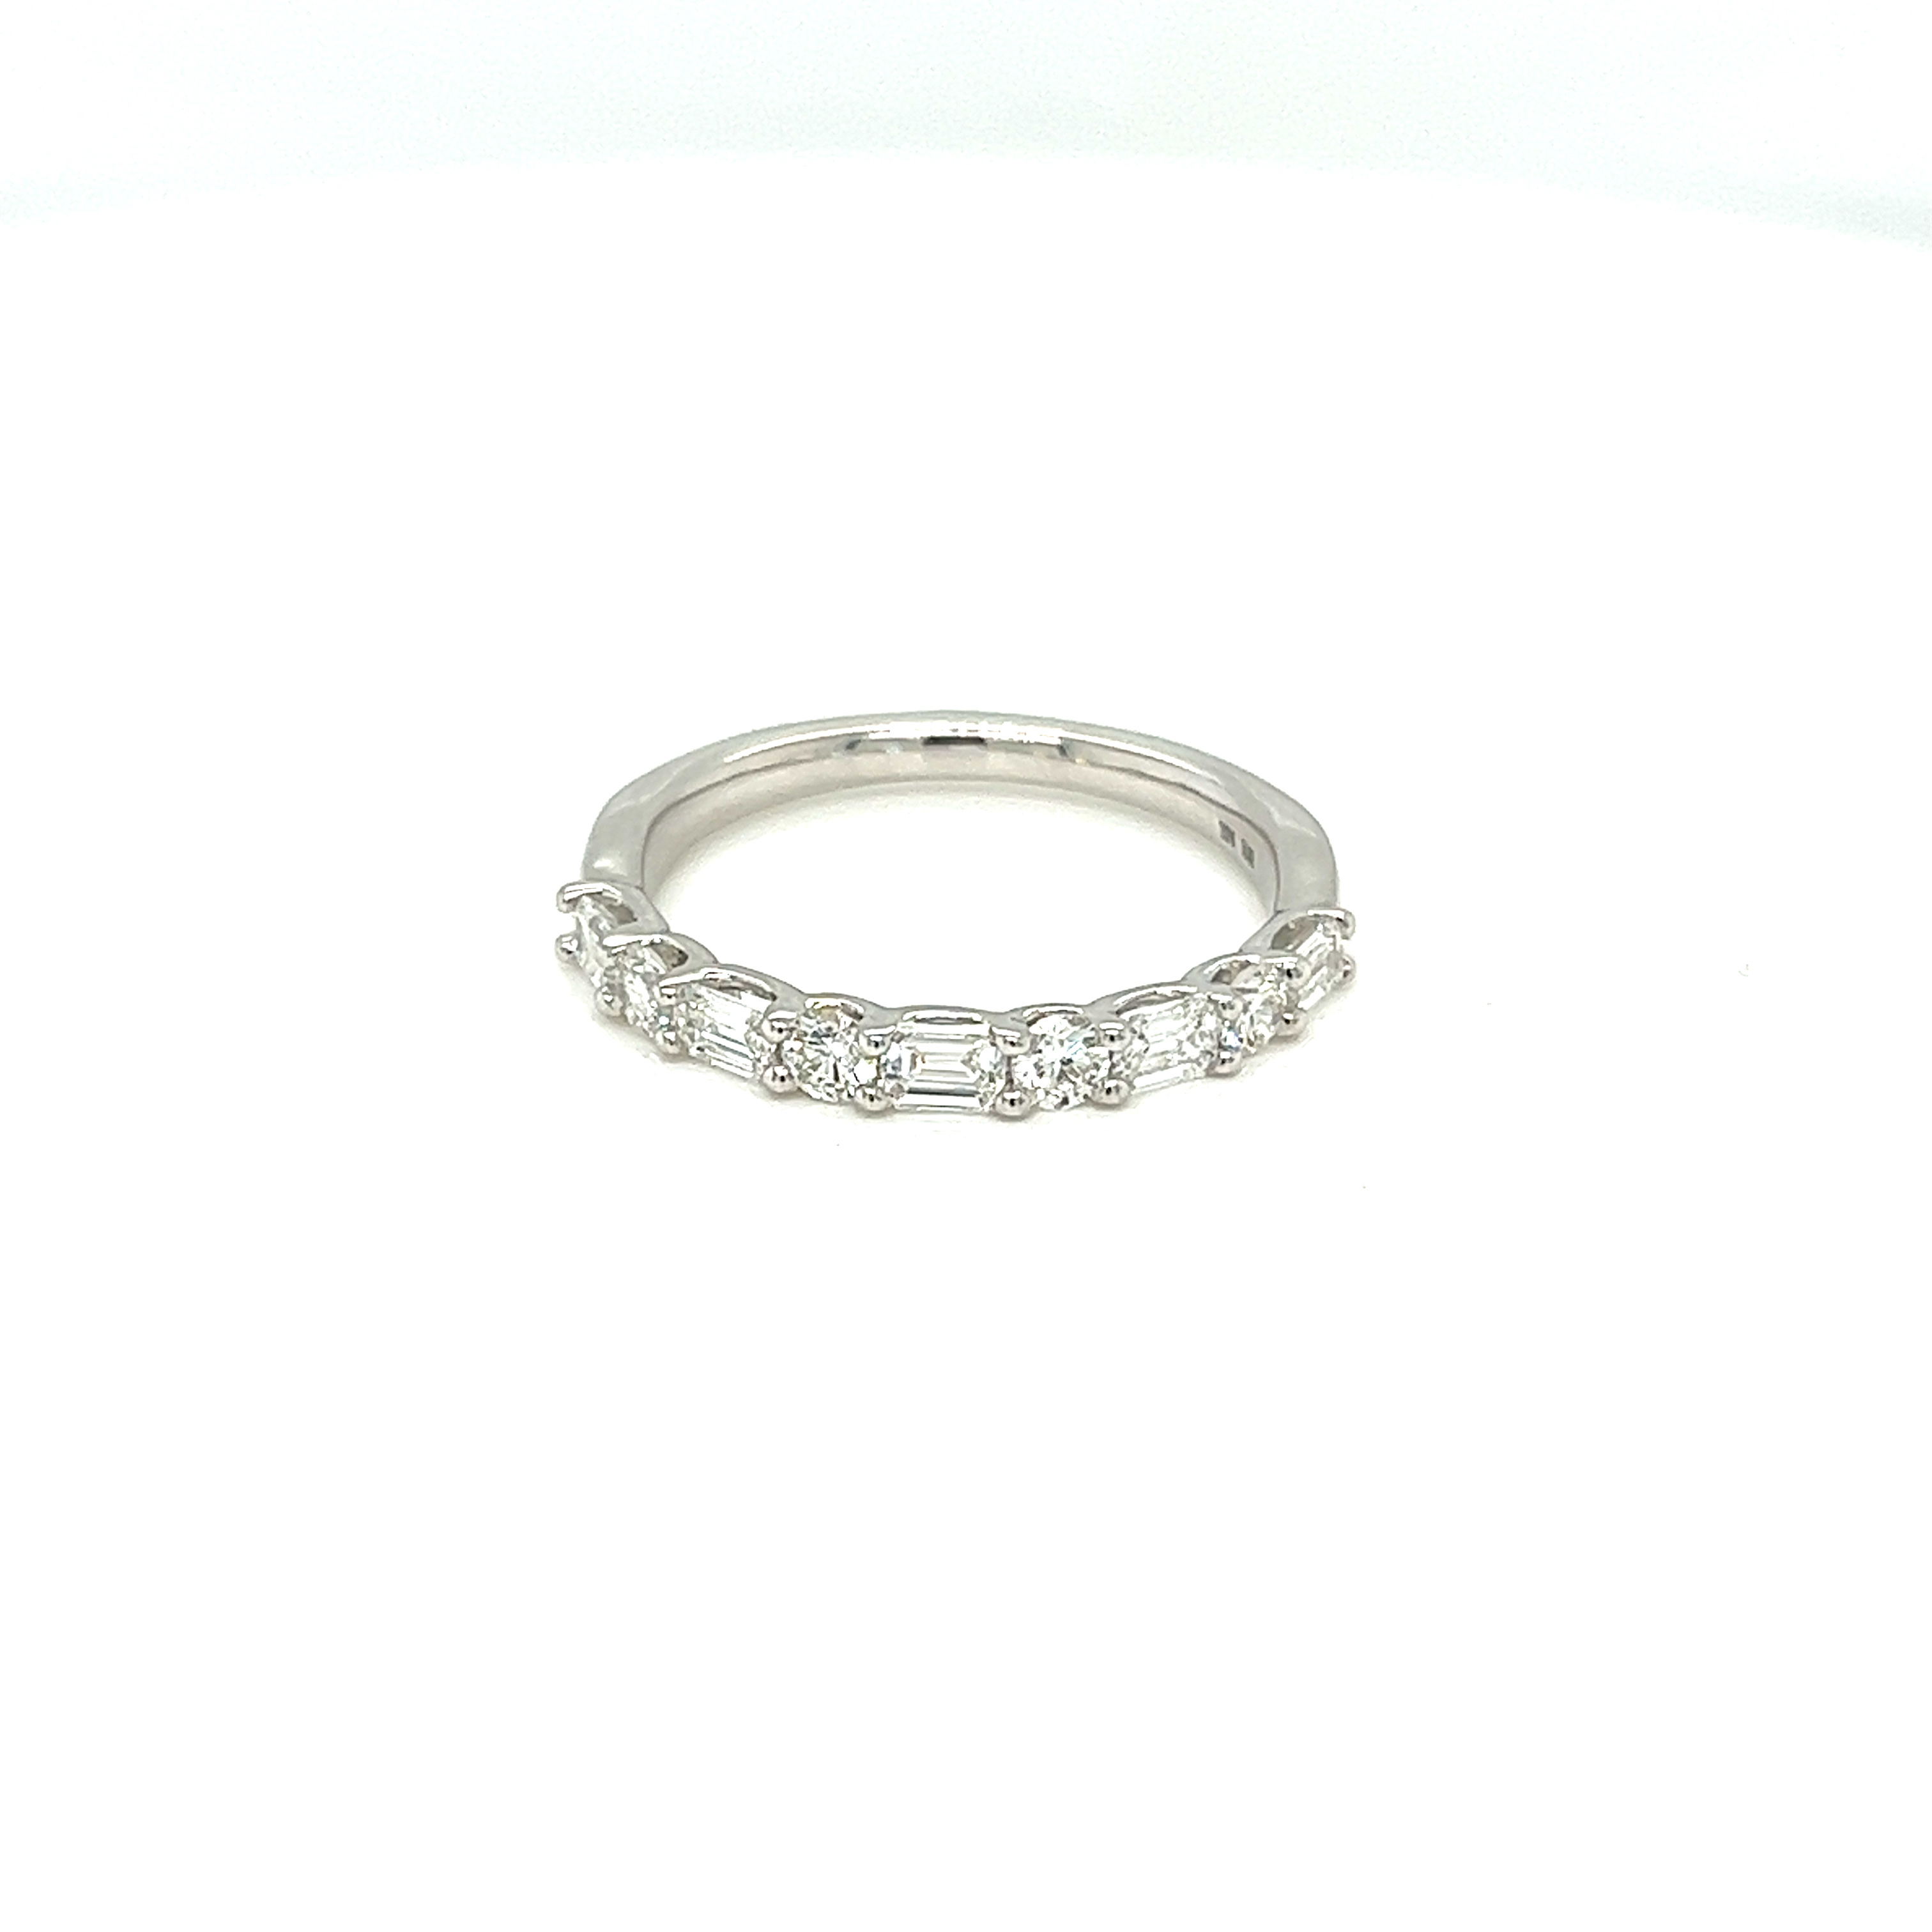 14 Karat white gold Wedding Band with 5 baguette diamonds and 4 round brilliant diamonds with a total weight of .75 carats with  G color and Vs clarity